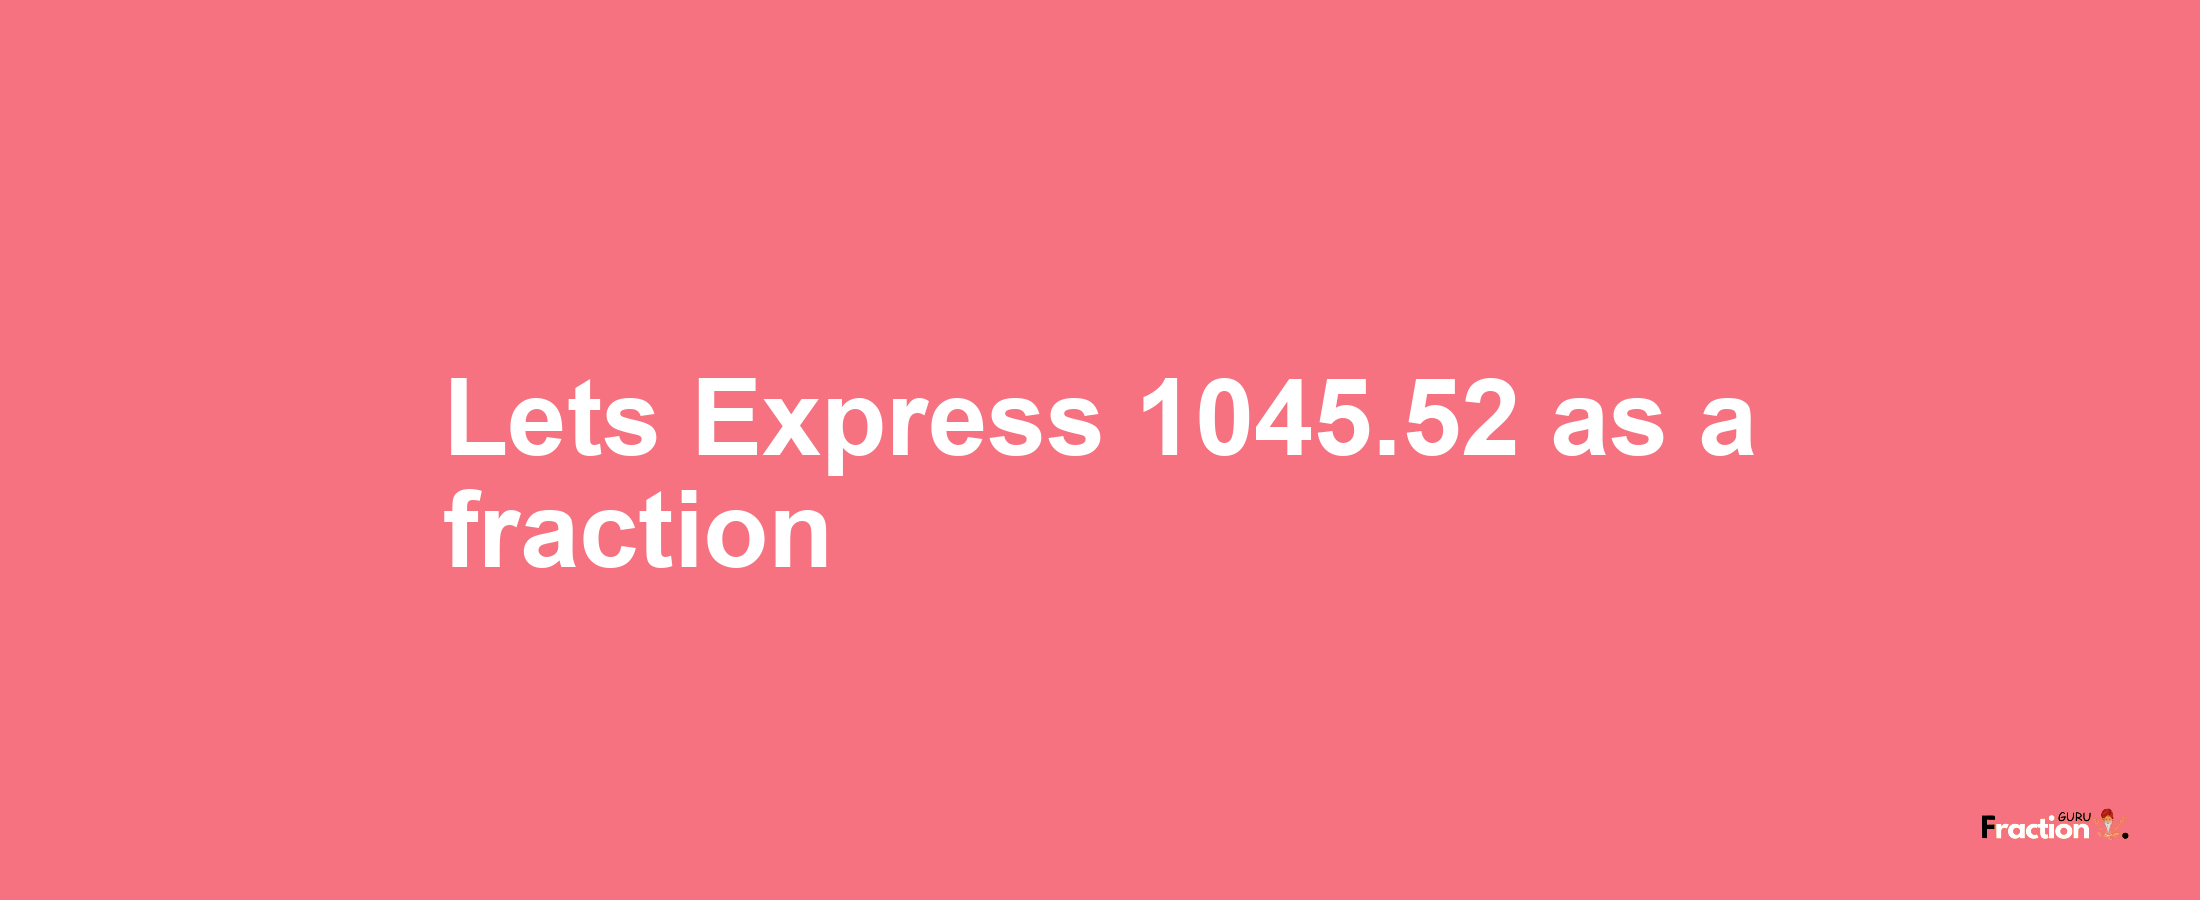 Lets Express 1045.52 as afraction